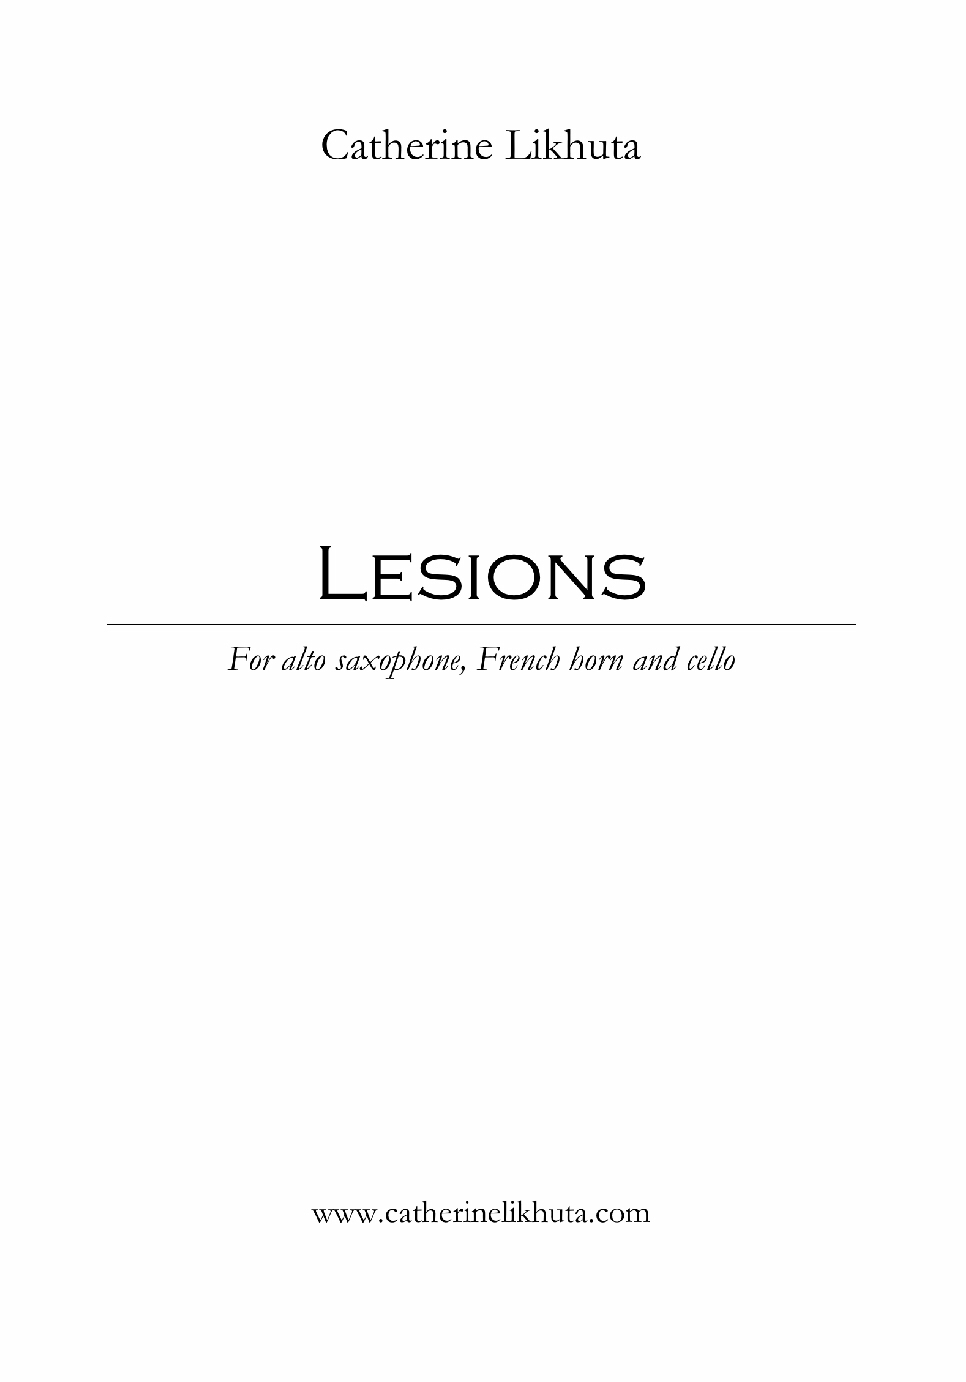 Lesions by Catherine Likhuta